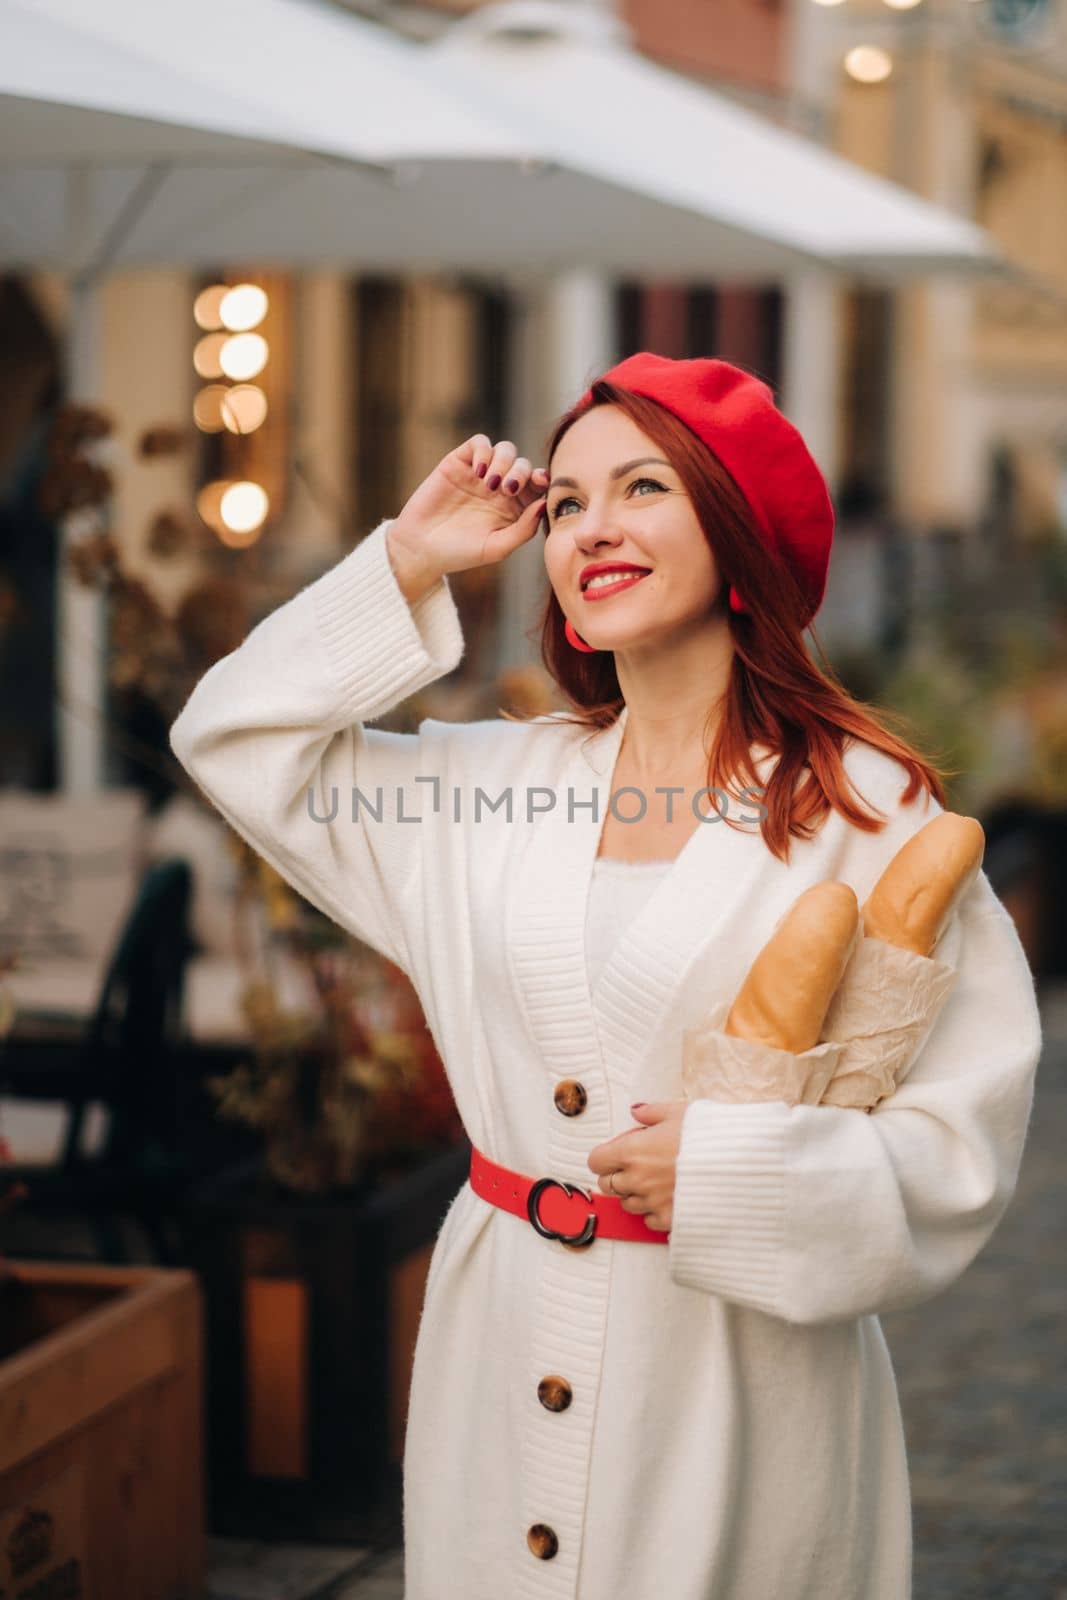 Portrait of a pretty woman in a red beret and a white cardigan with baguettes in her hands strolling through the autumn city by Lobachad